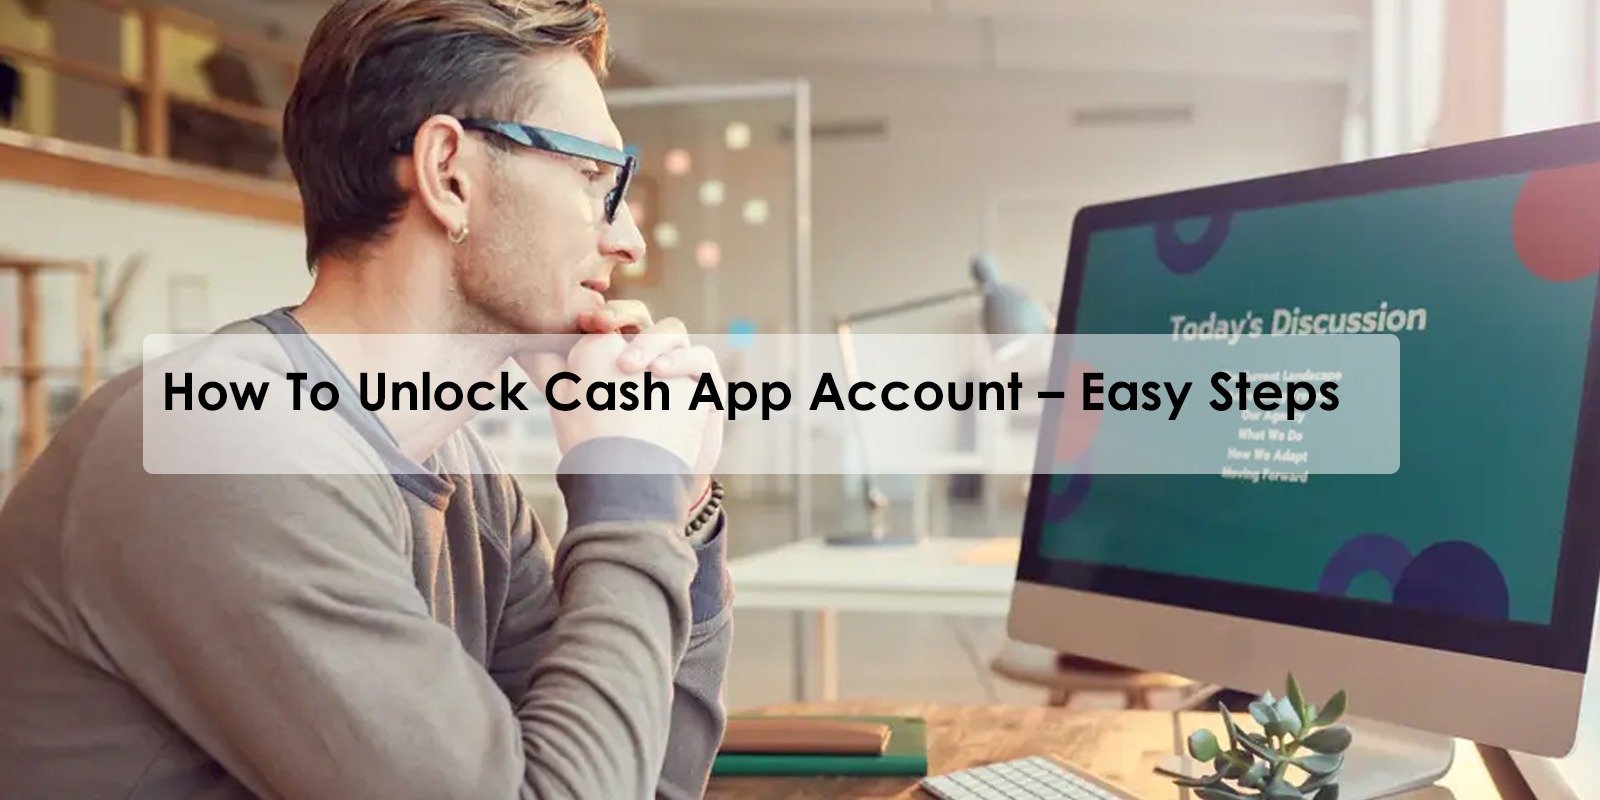 How To Unlock Cash App Account - Easy Steps